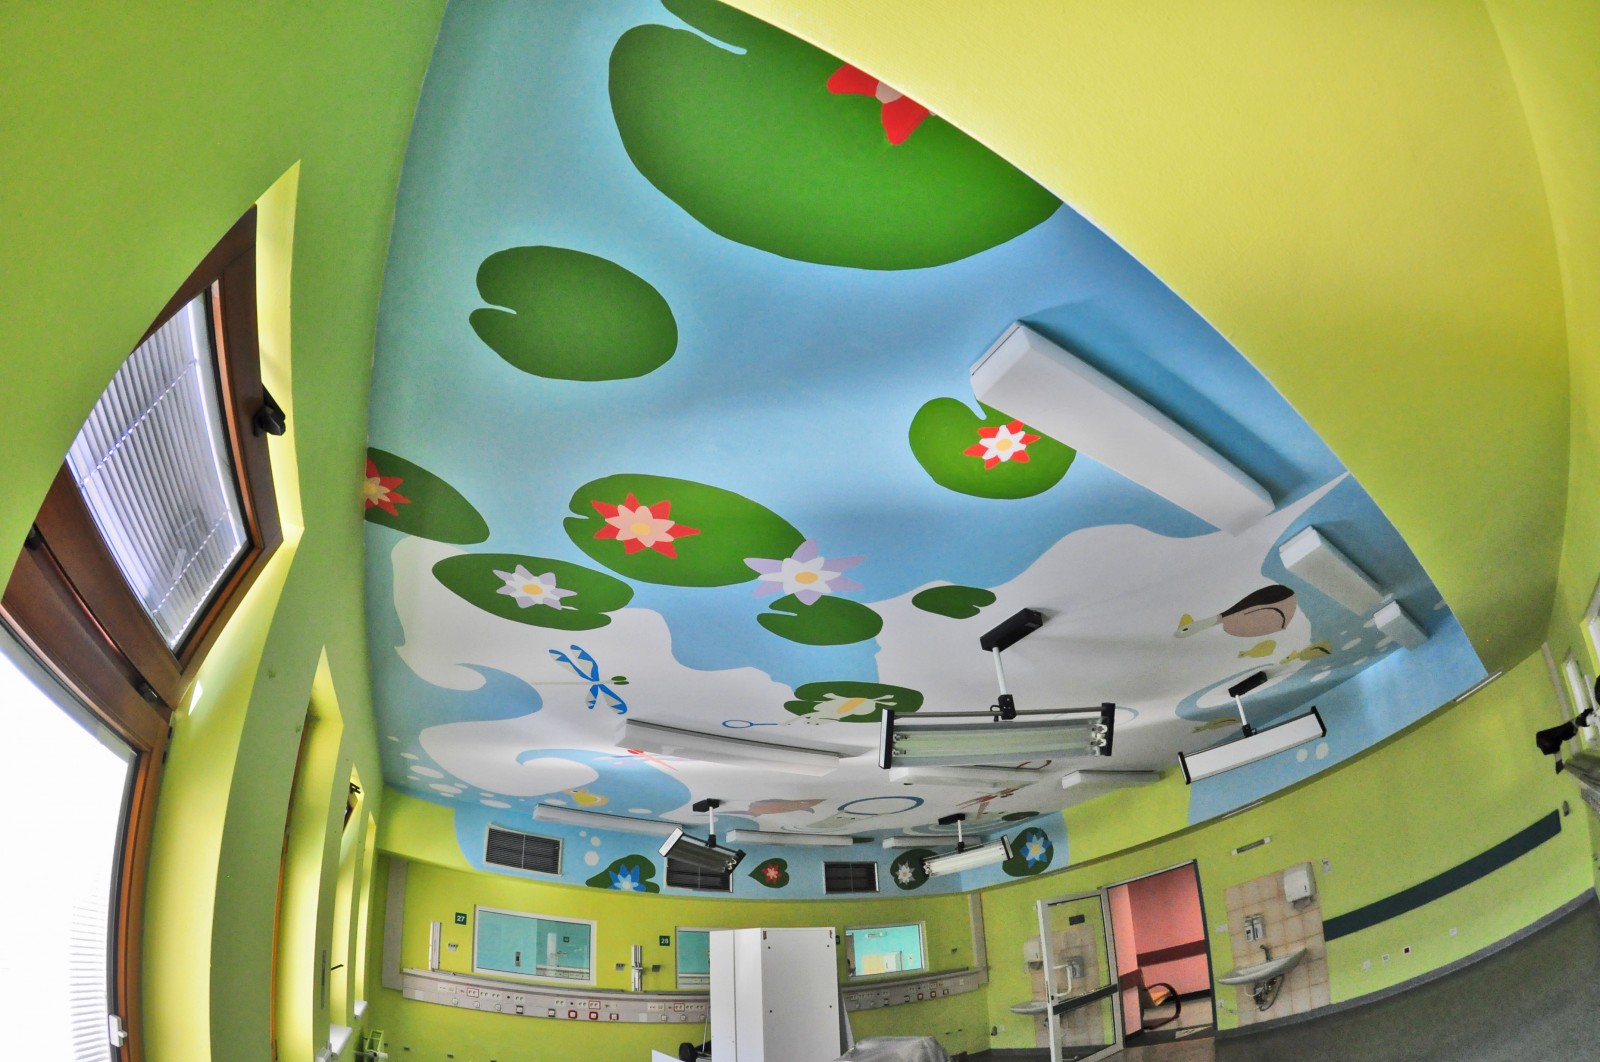 Repainted ceiling in The Children's Memorial Health Institute in Warsaw Ceiling Operation | Ceiling Operation - The Children’s Memorial Health Institute | CSR | About us